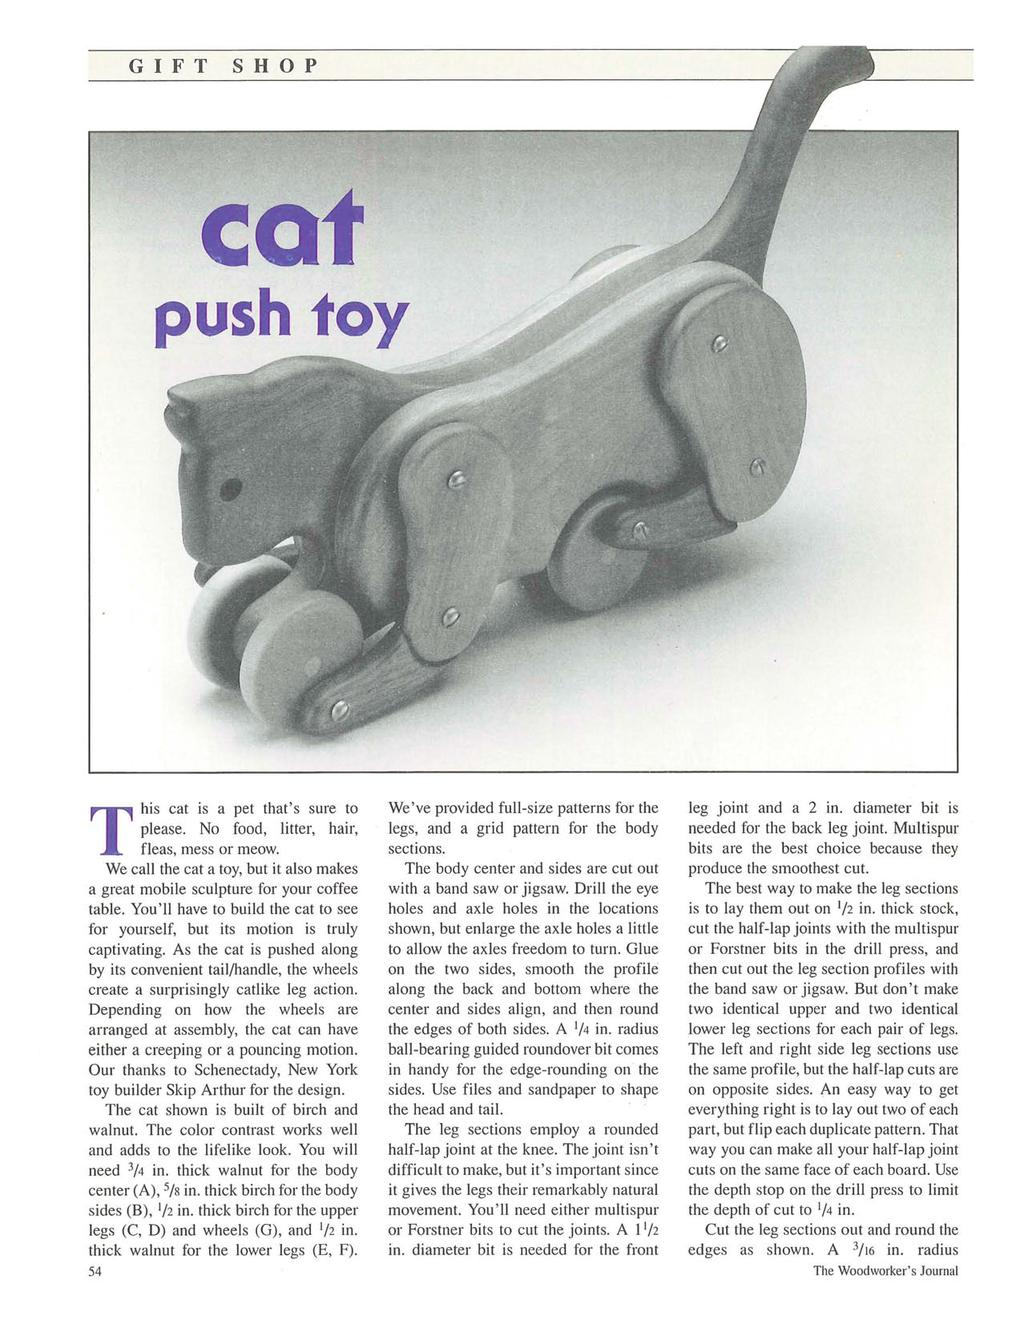 at push toy This cat is a pet that's sure to please. No food, litter, hair, fleas, mess or meow. We call the cat a toy, but it also makes a great mobile sculpture for your coffee table.